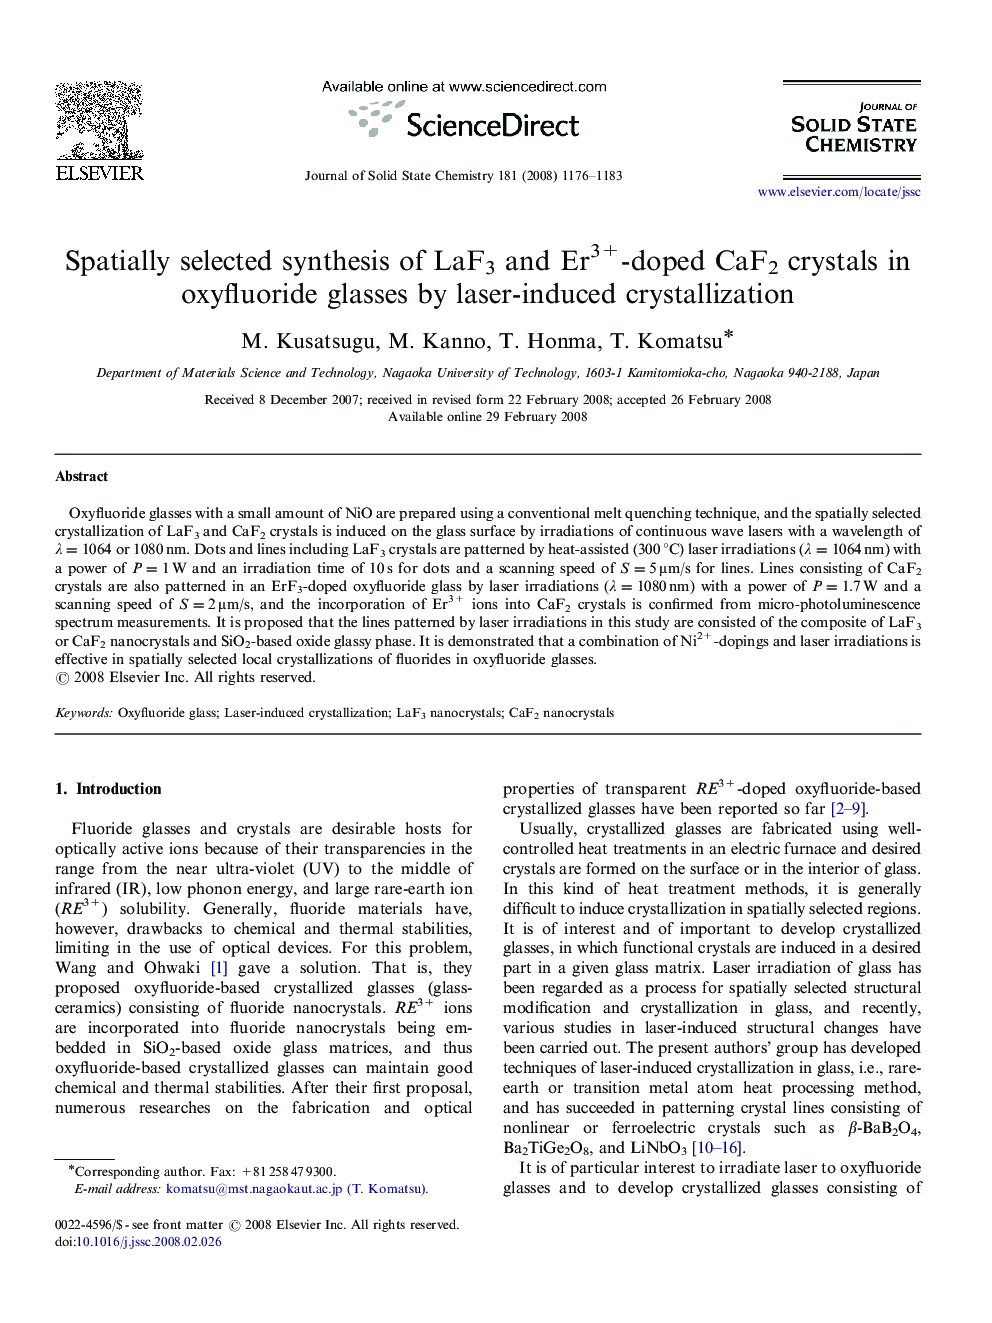 Spatially selected synthesis of LaF3 and Er3+-doped CaF2 crystals in oxyfluoride glasses by laser-induced crystallization